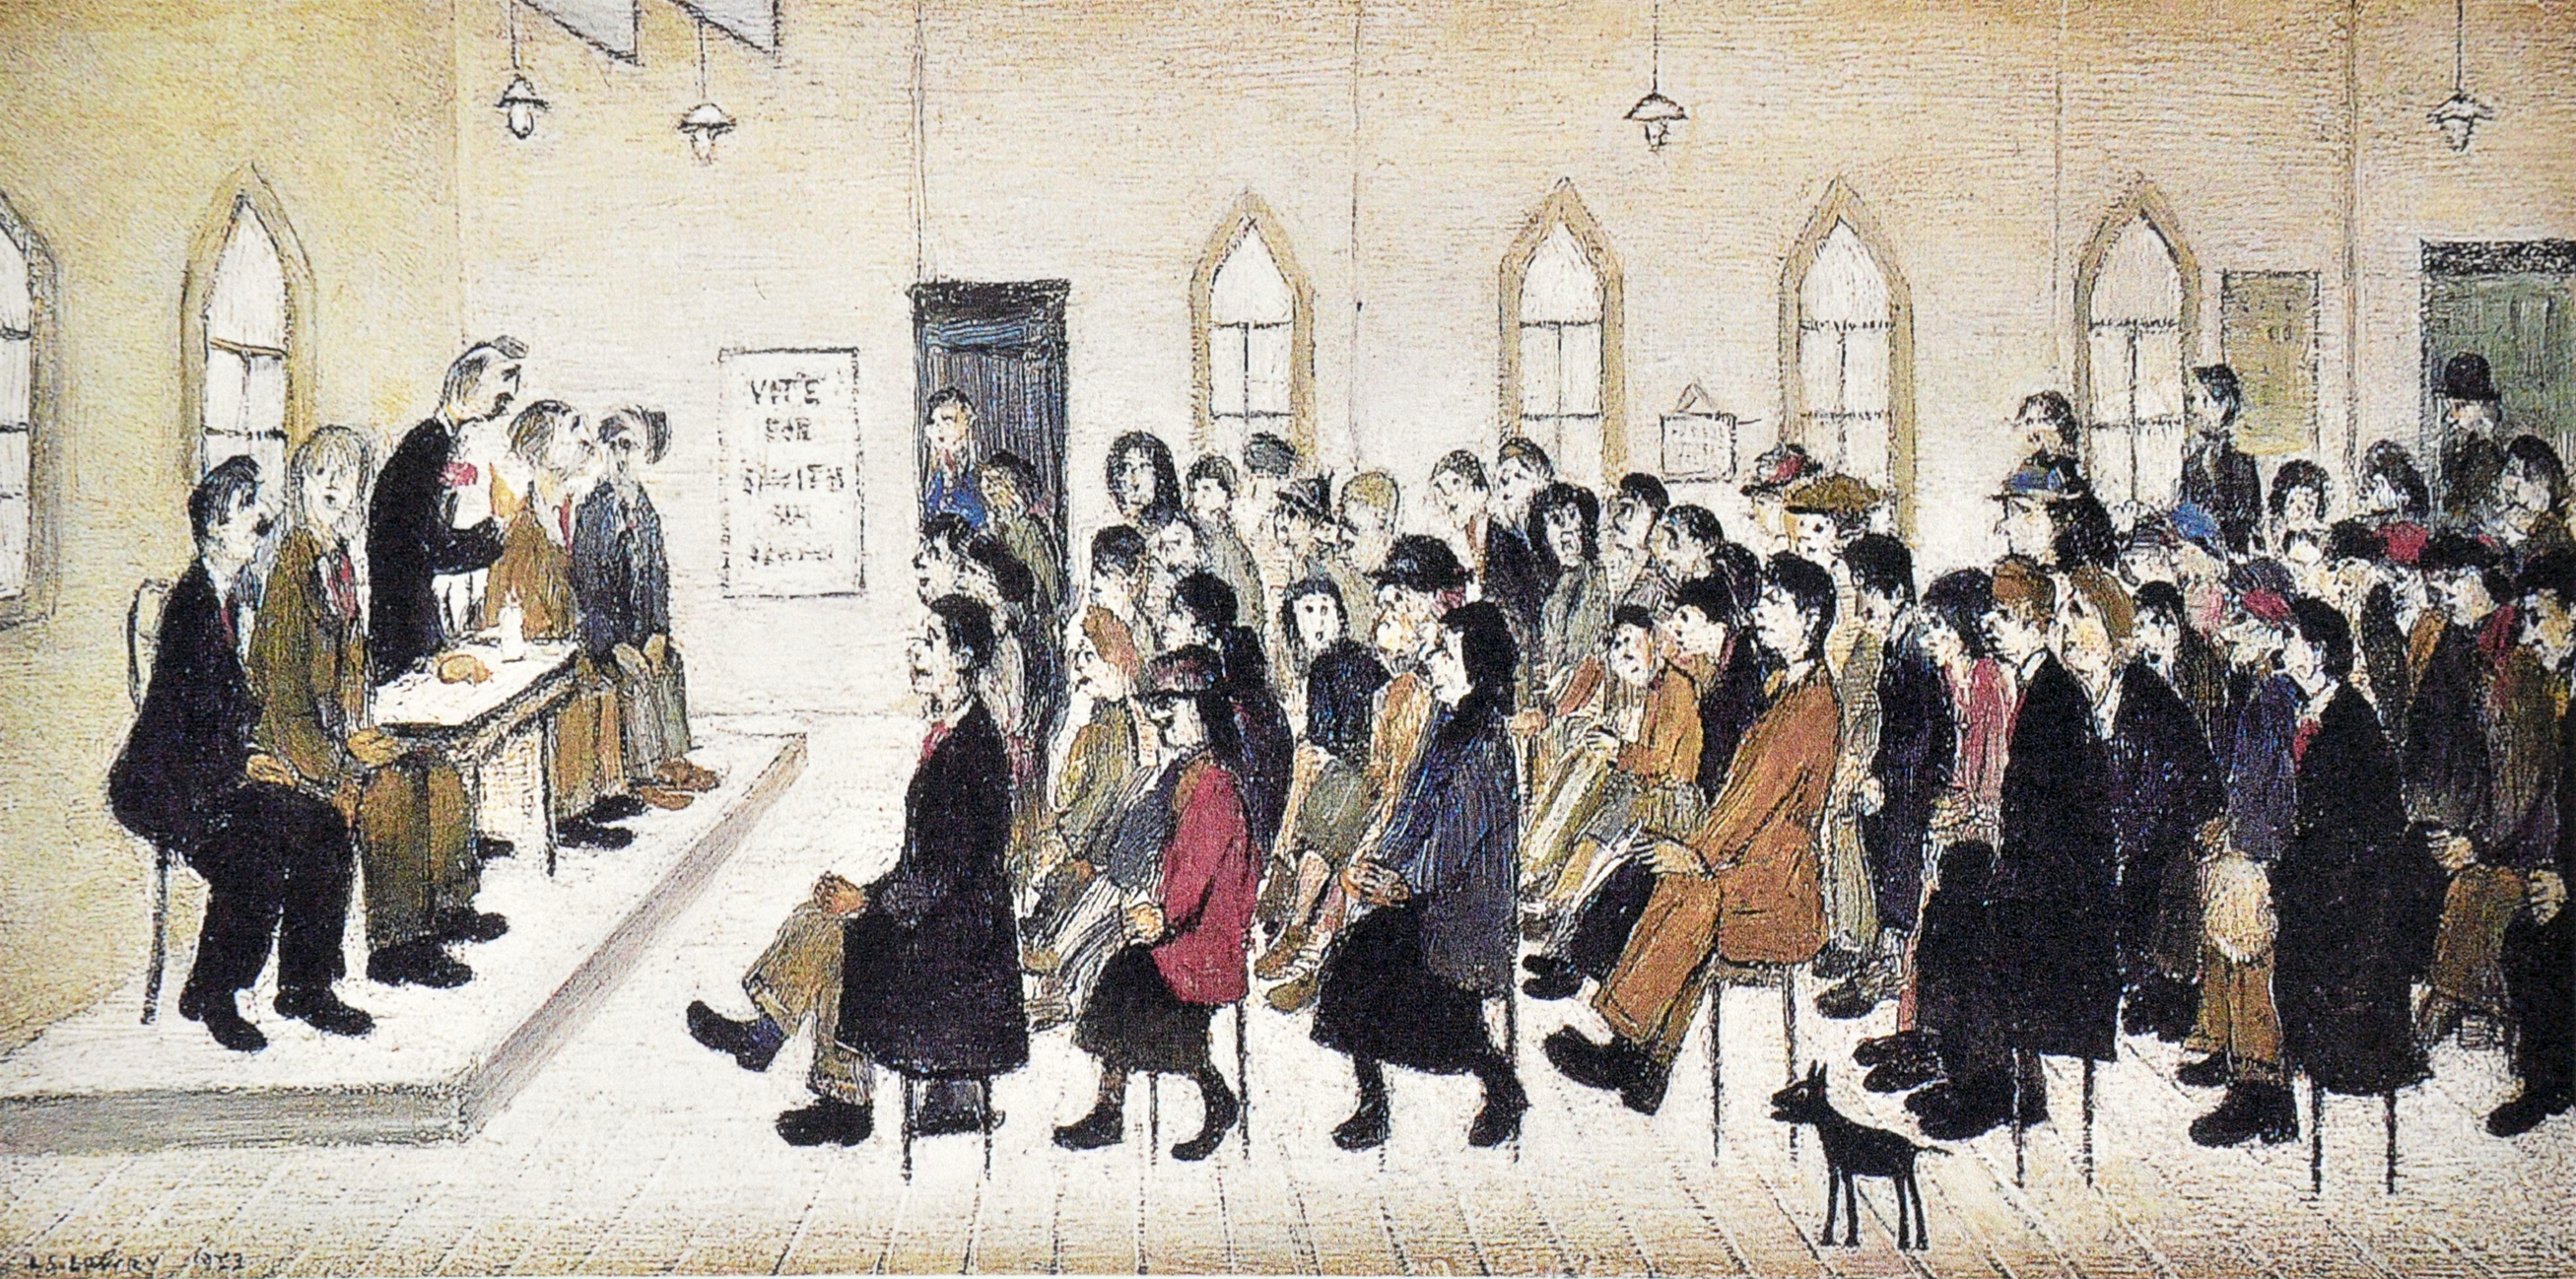 Political meeting, Ashton-under-Lyne (1953) by Laurence Stephen Lowry (1887 - 1976), English artist.